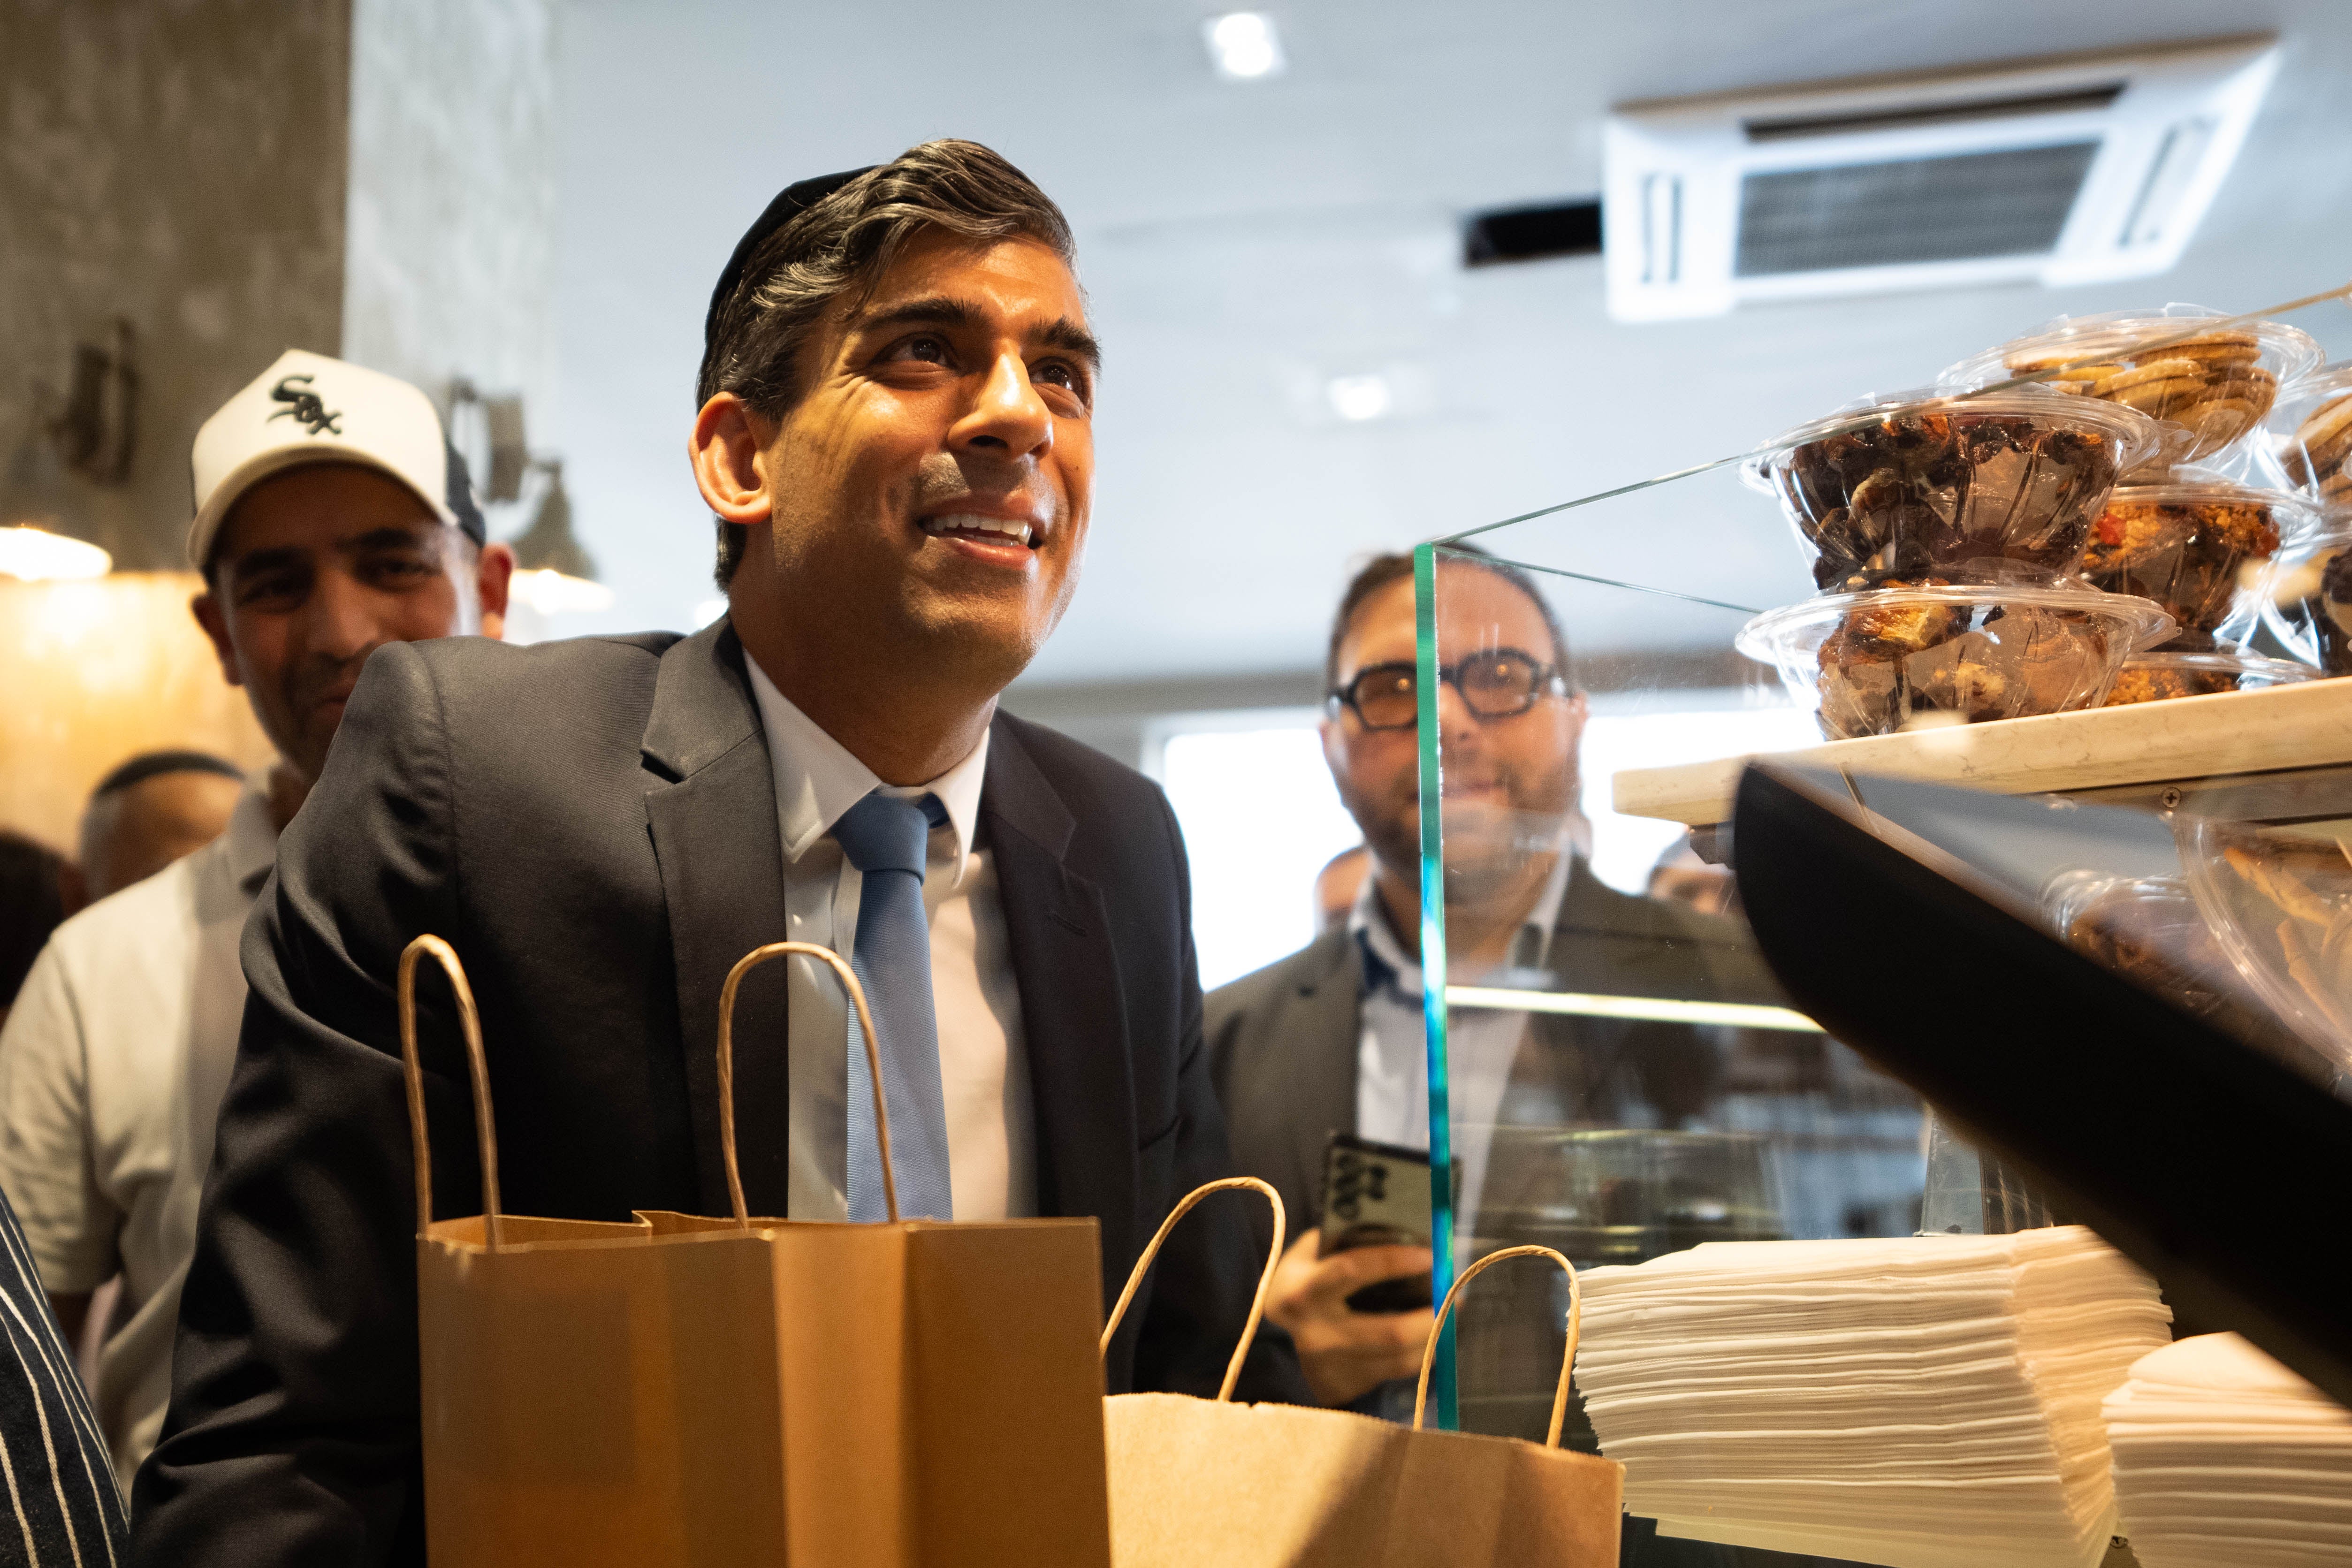 Prime Minister Rishi Sunak also visited Bread the bakery in Golders Green on the campaign trail in North London (James Manning/PA)